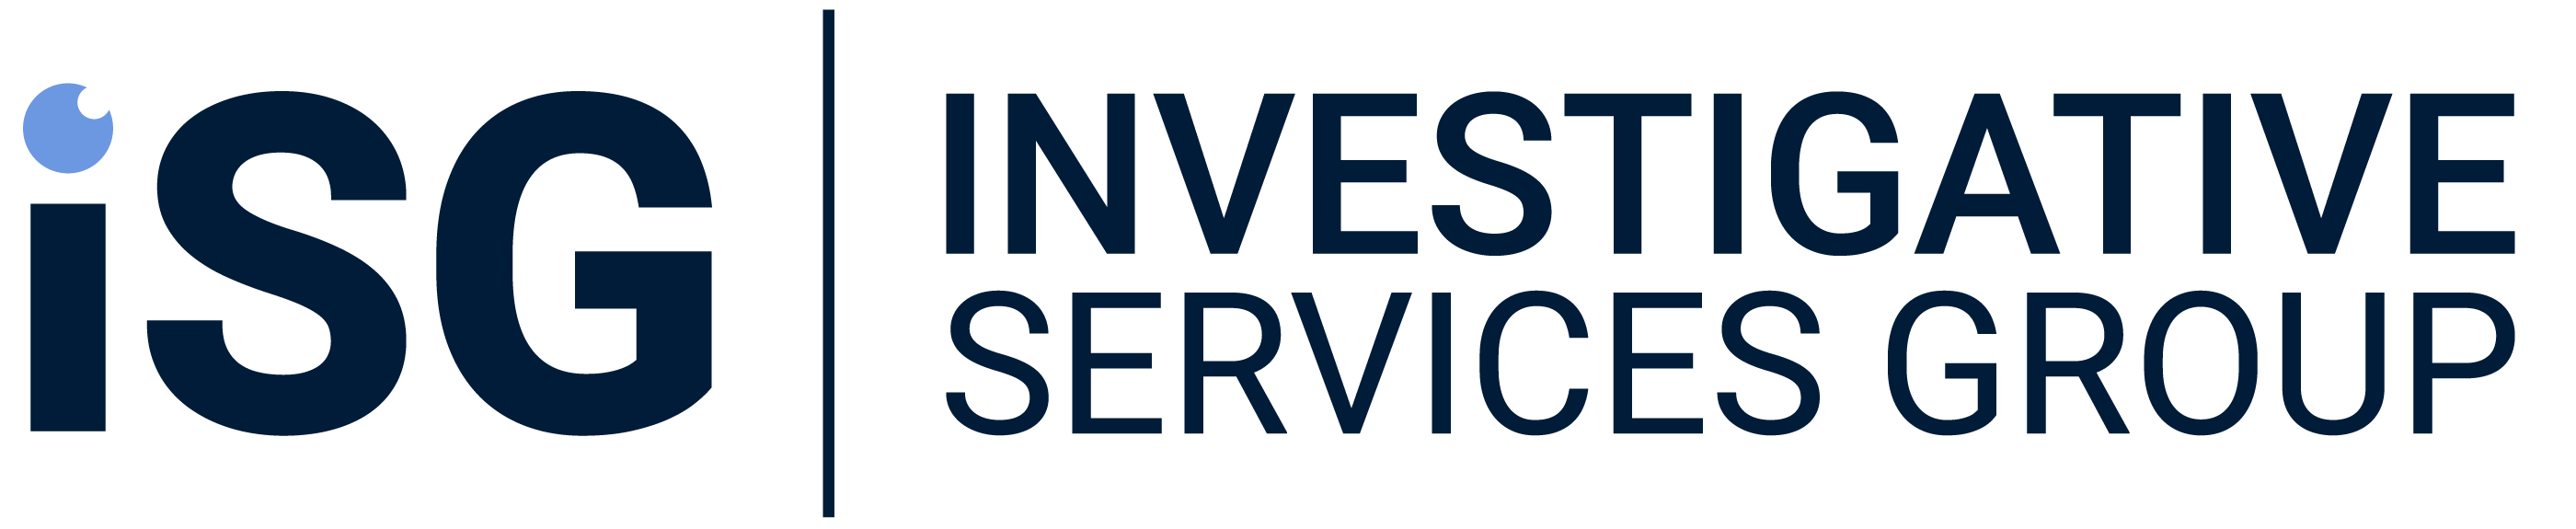 Investigative Services Group